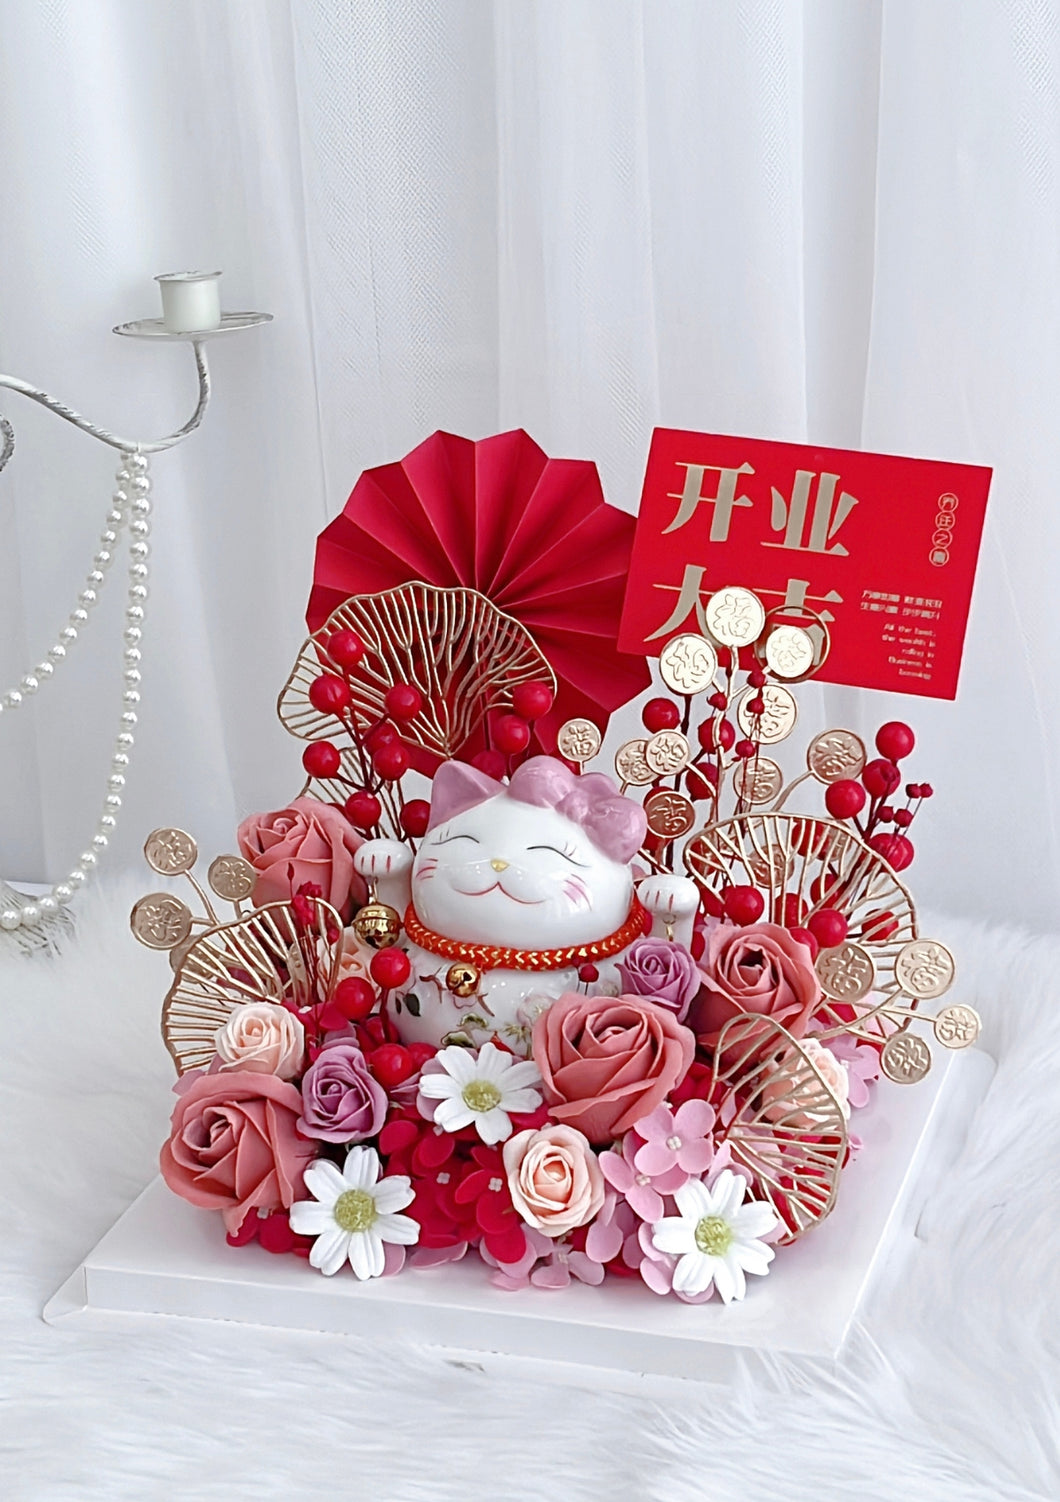 New Career and a Grand Exhibition Fortune Cat with Red Soap Flower Box 招财进宝招财猫香皂花开业香皂花礼盒